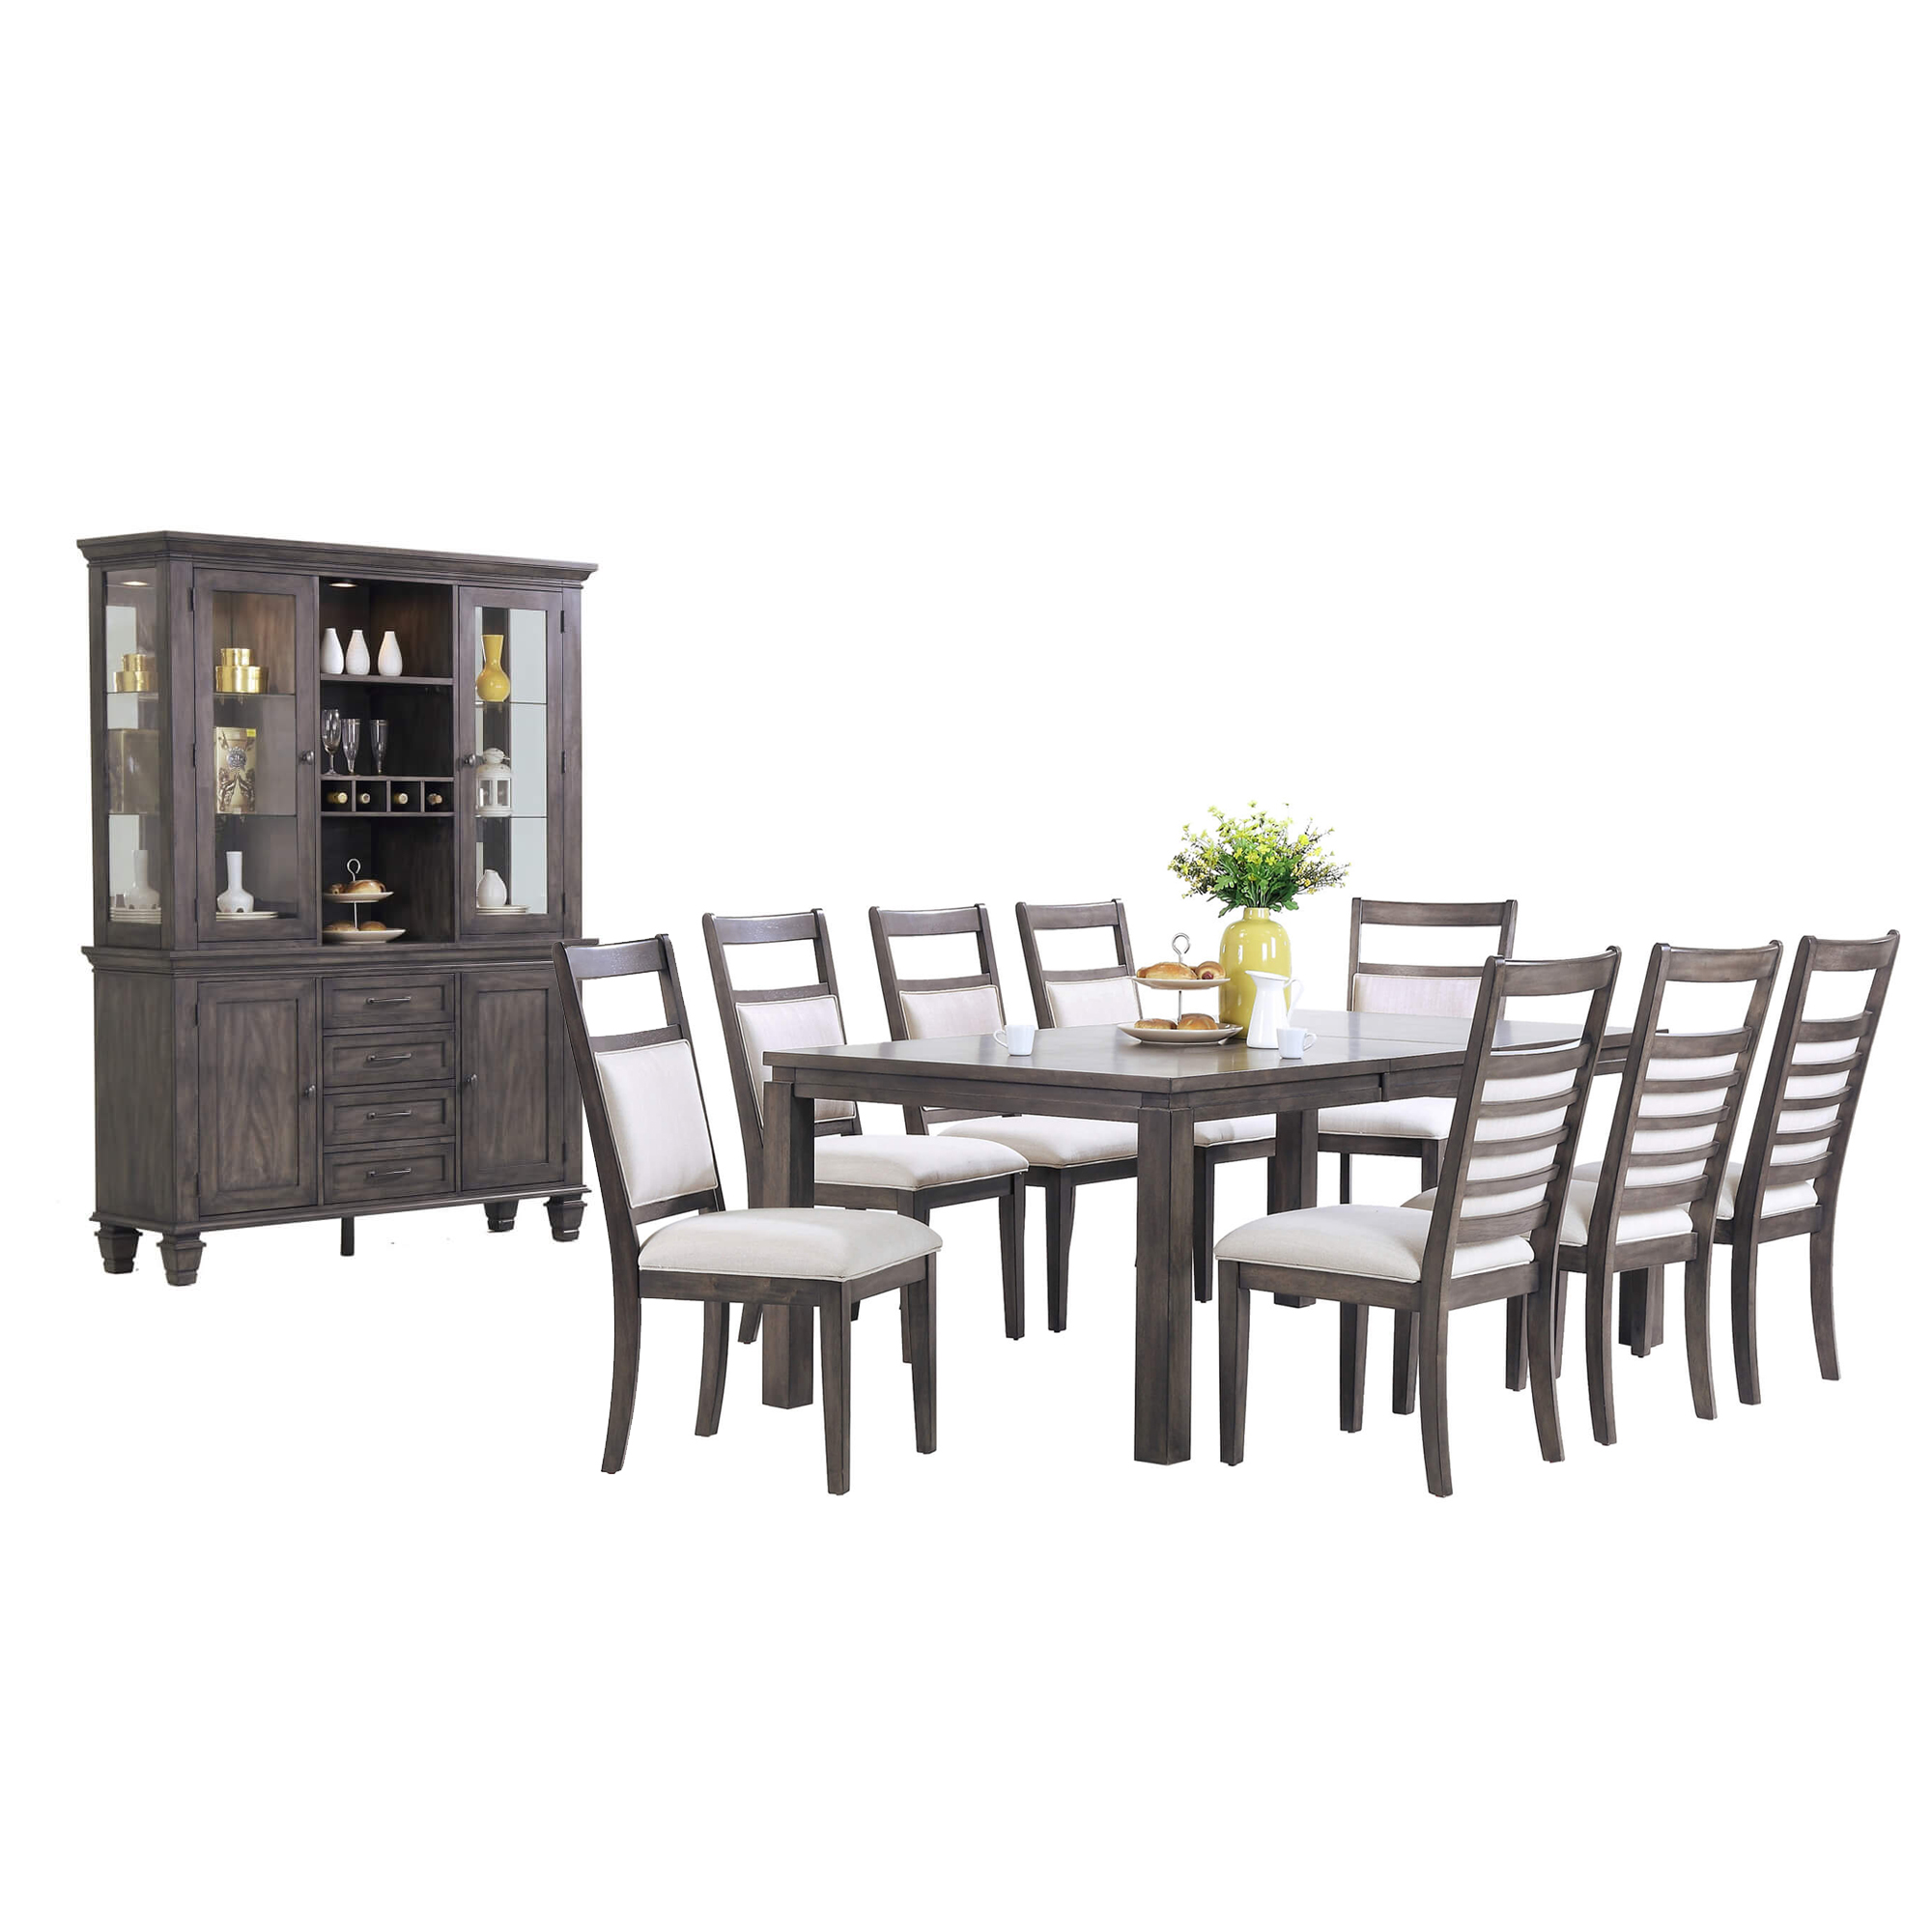 Dining Set With China Cabinet Shade, Dining Room Sets With China Hutch